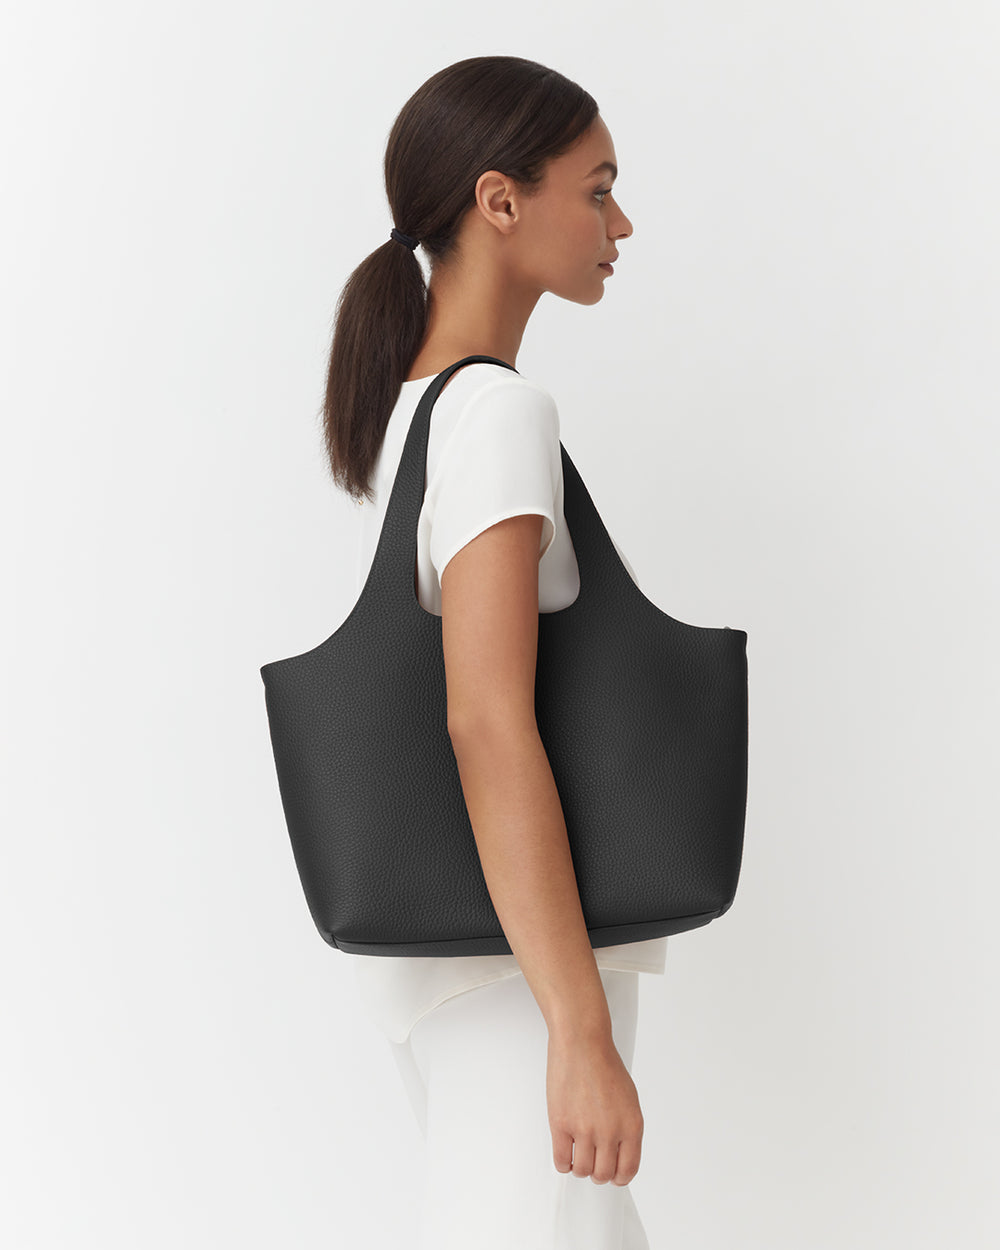 Cuyana's New System Tote Bag Is More Functional for Everyday Use